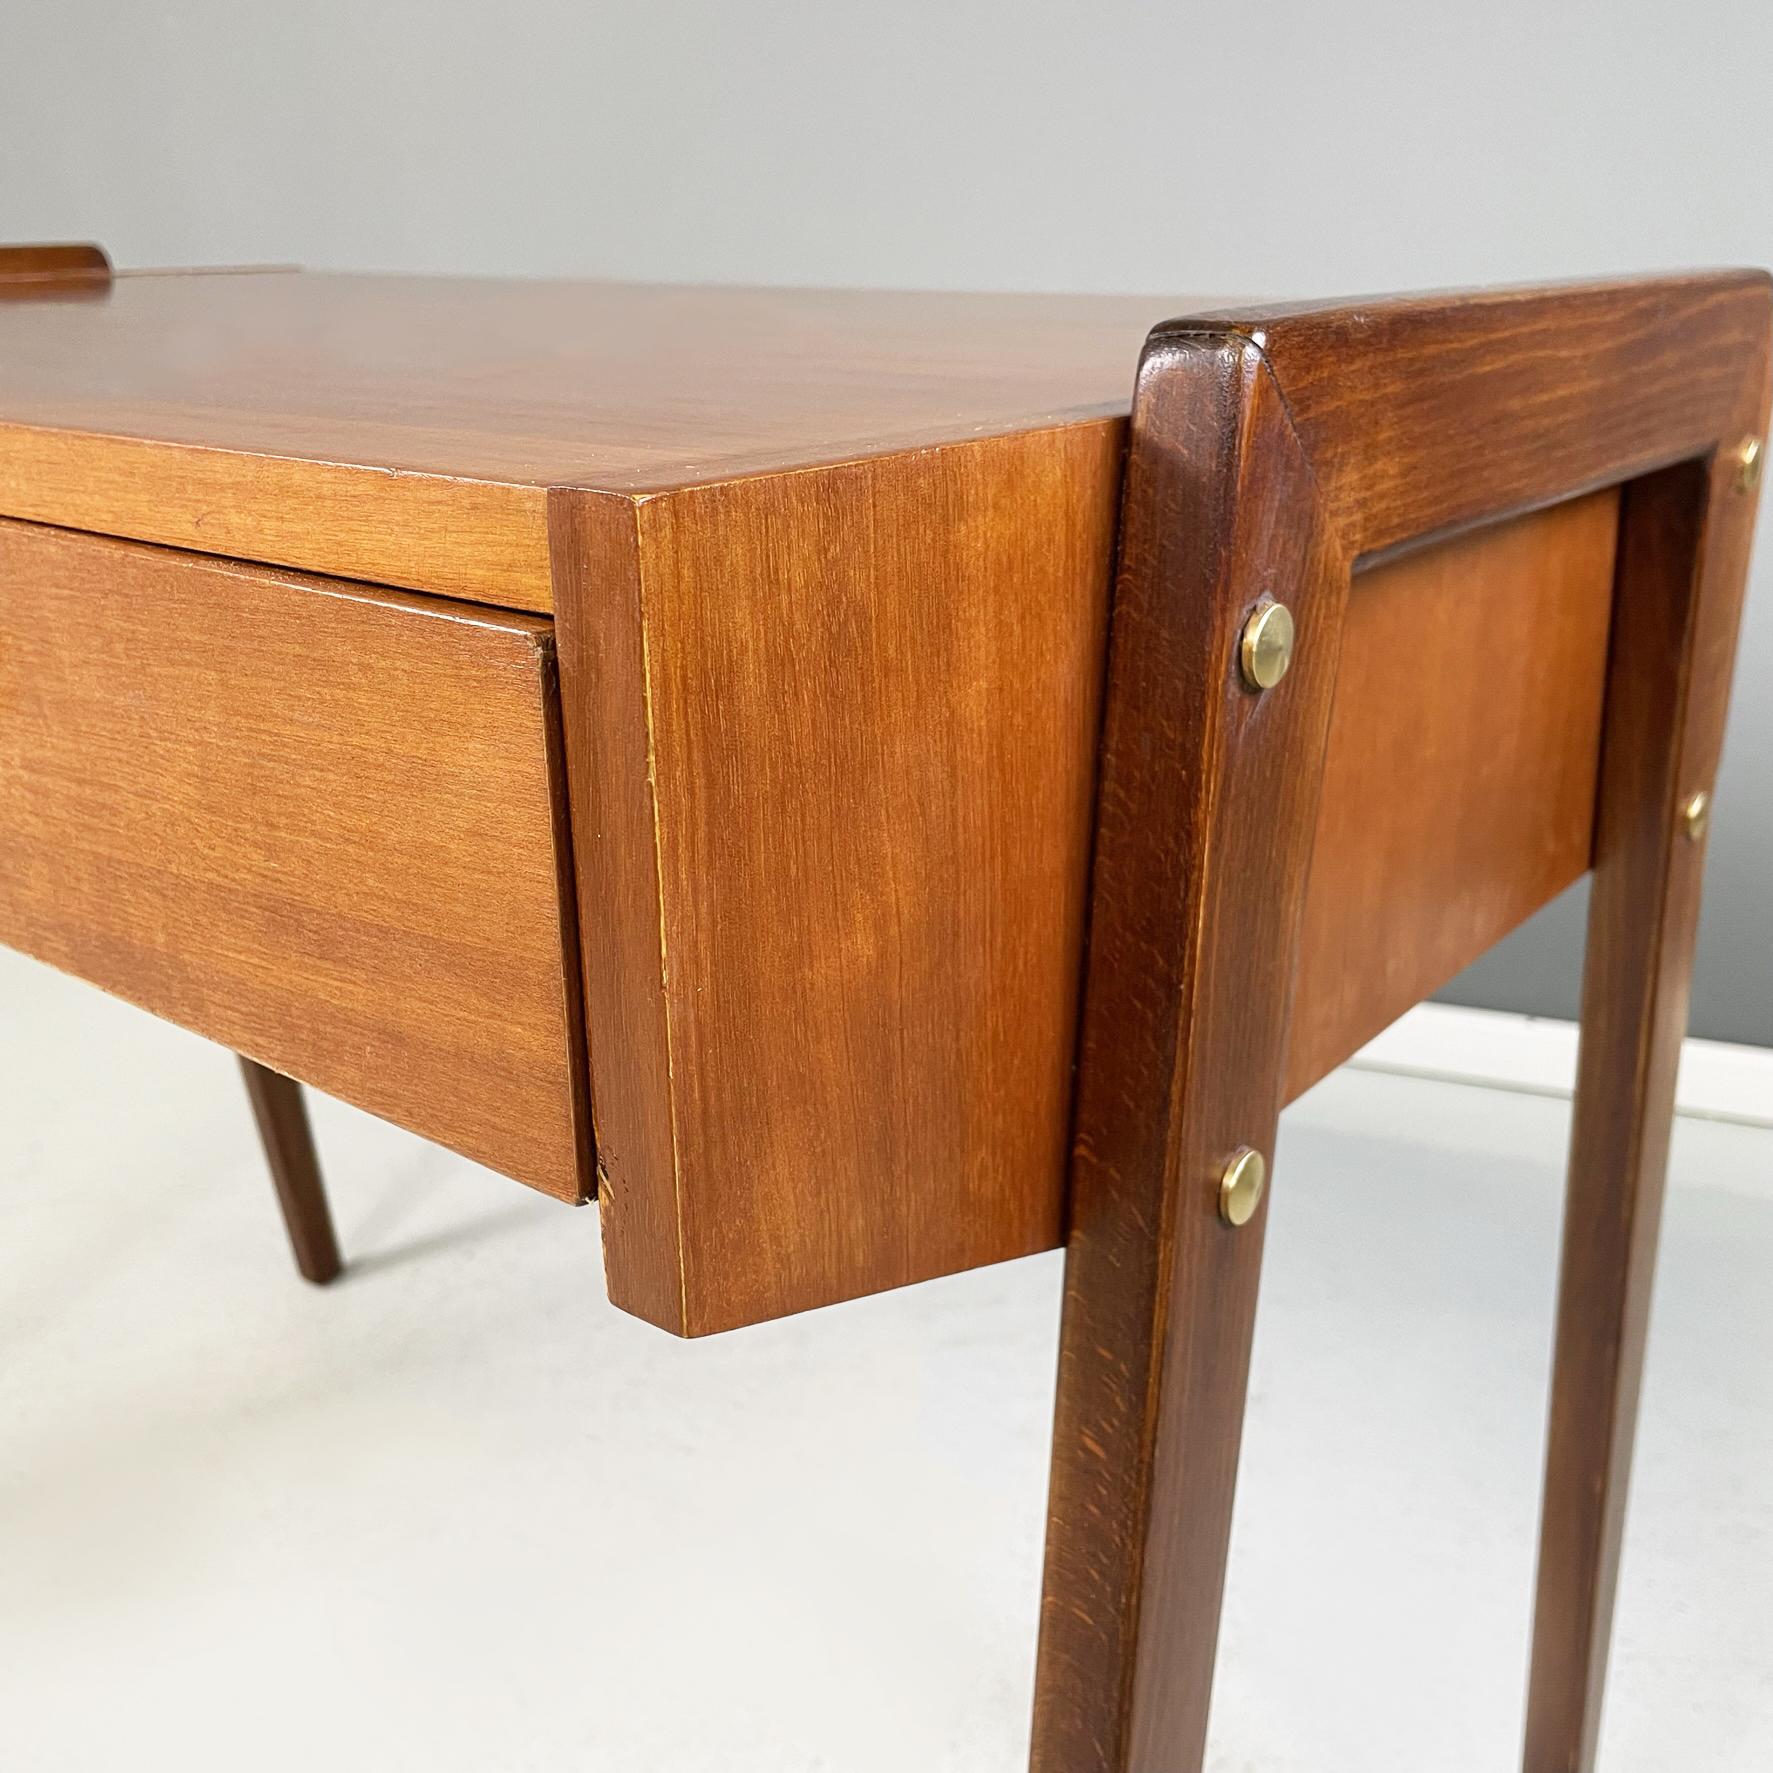 German Midcentury Wooden Desk with Drawers and Brass Details, circa 1960s 6